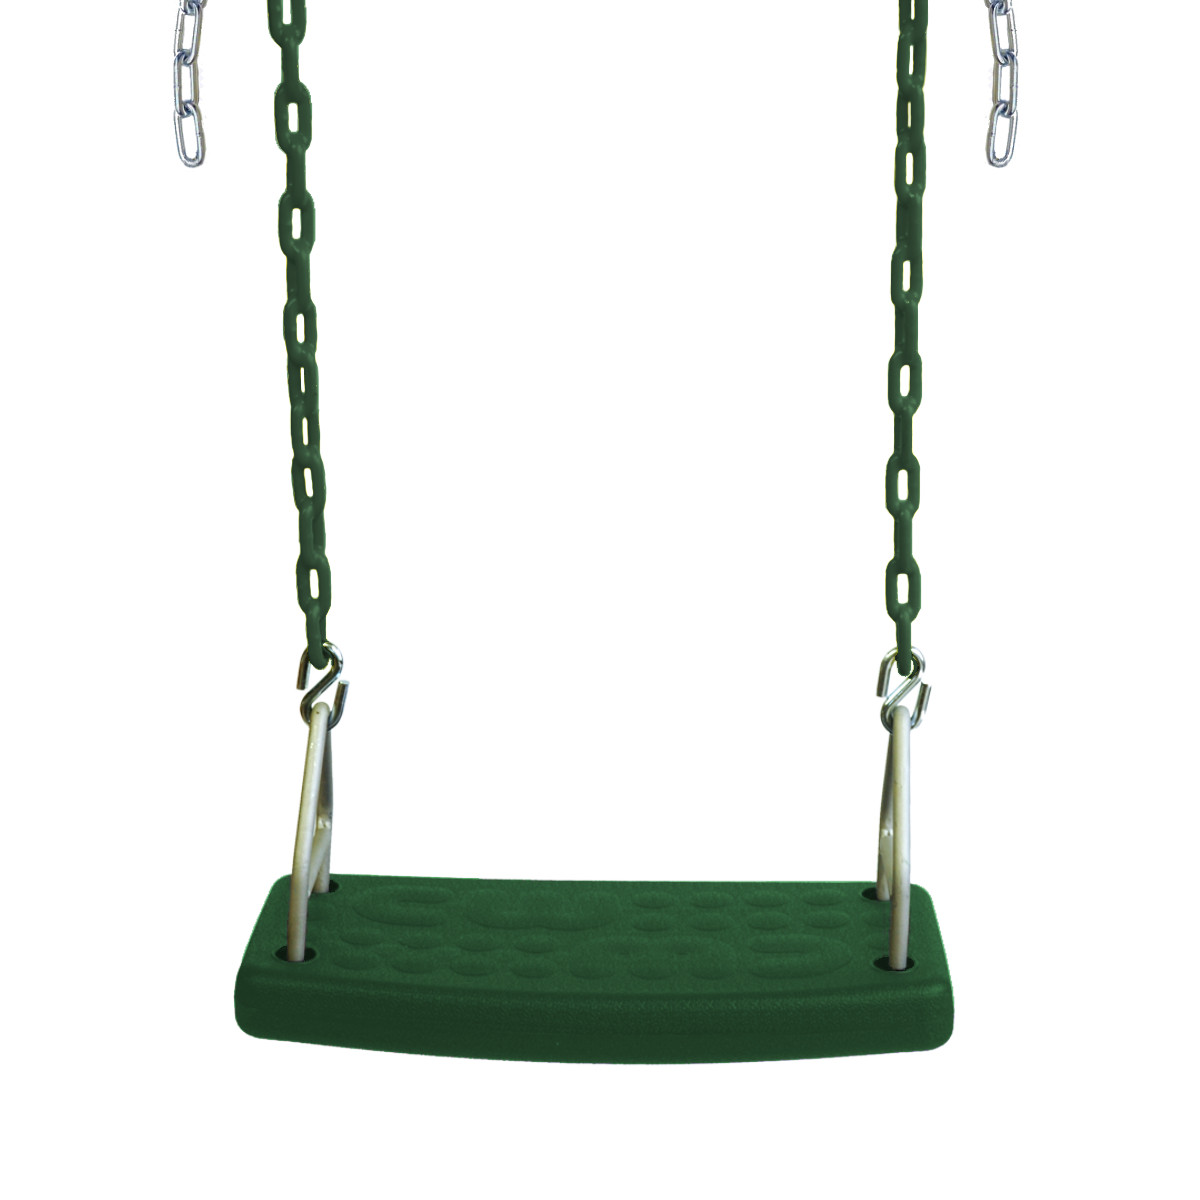 Molded Flat Swing Seat with 8'6" Heavy Duty Chain (S-176)